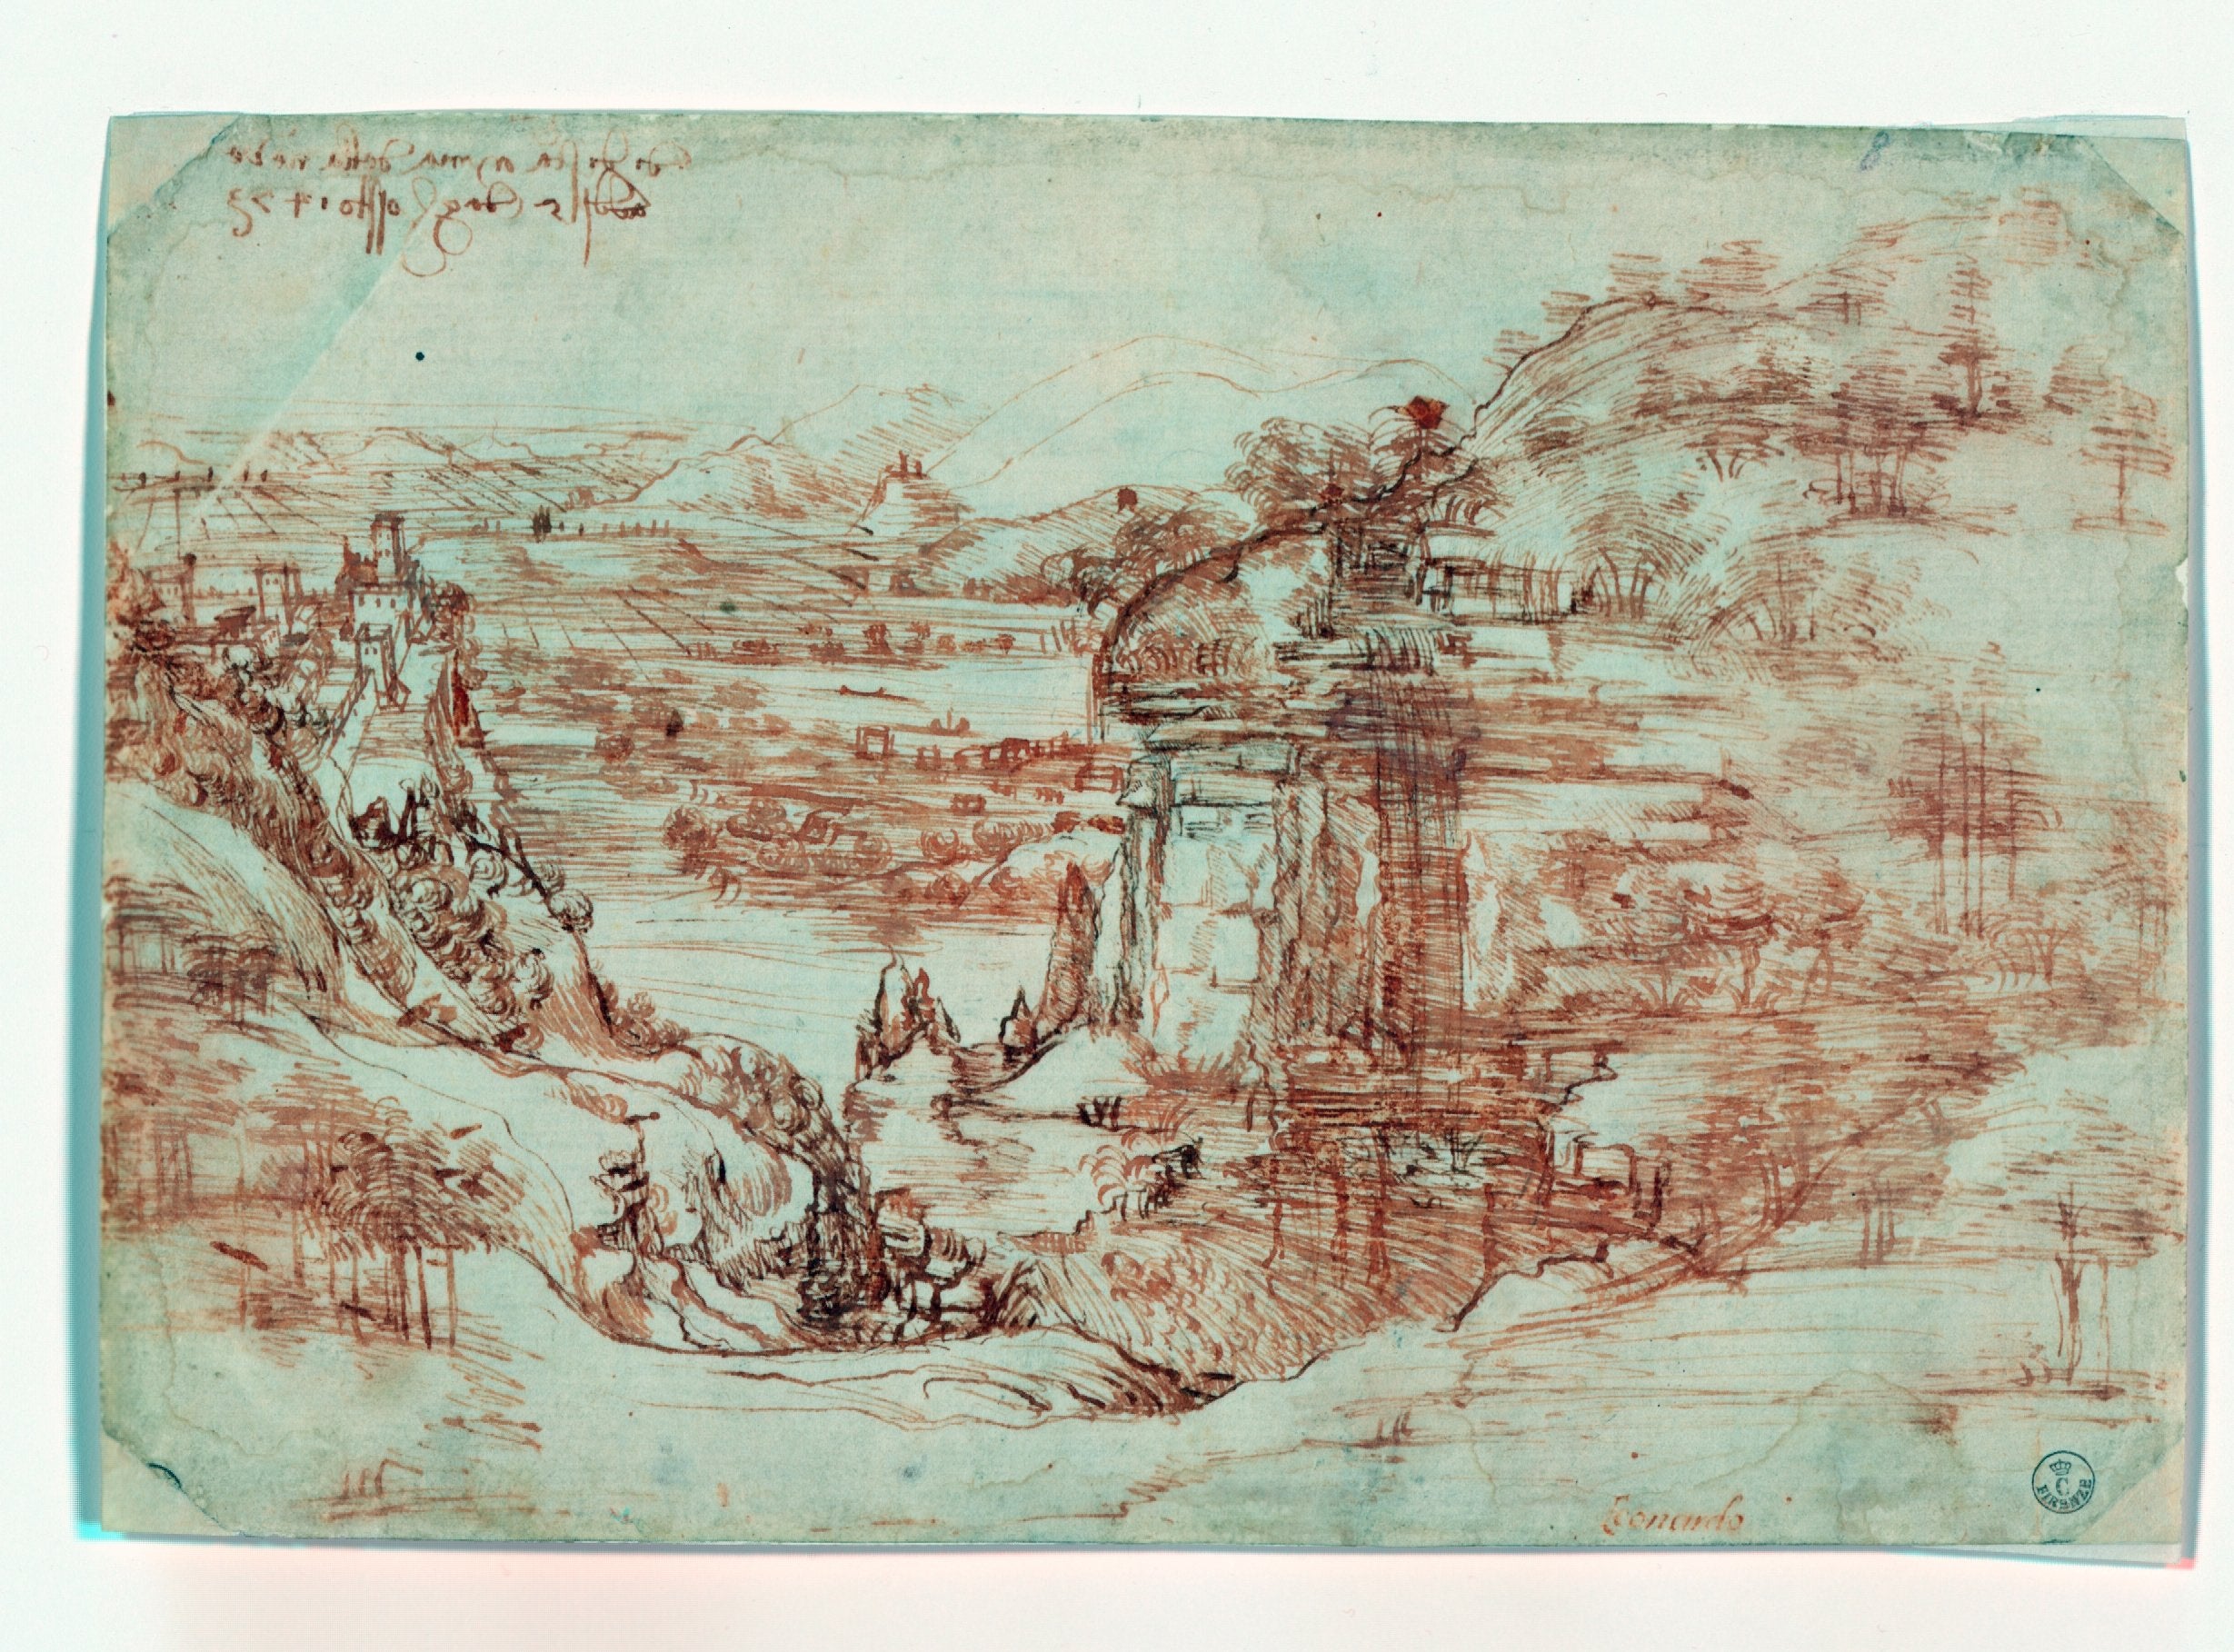 Infrared light is shone onto Landscape (8P), 1473, done by Leonardo da Vinci, during tests in Florence, Italy